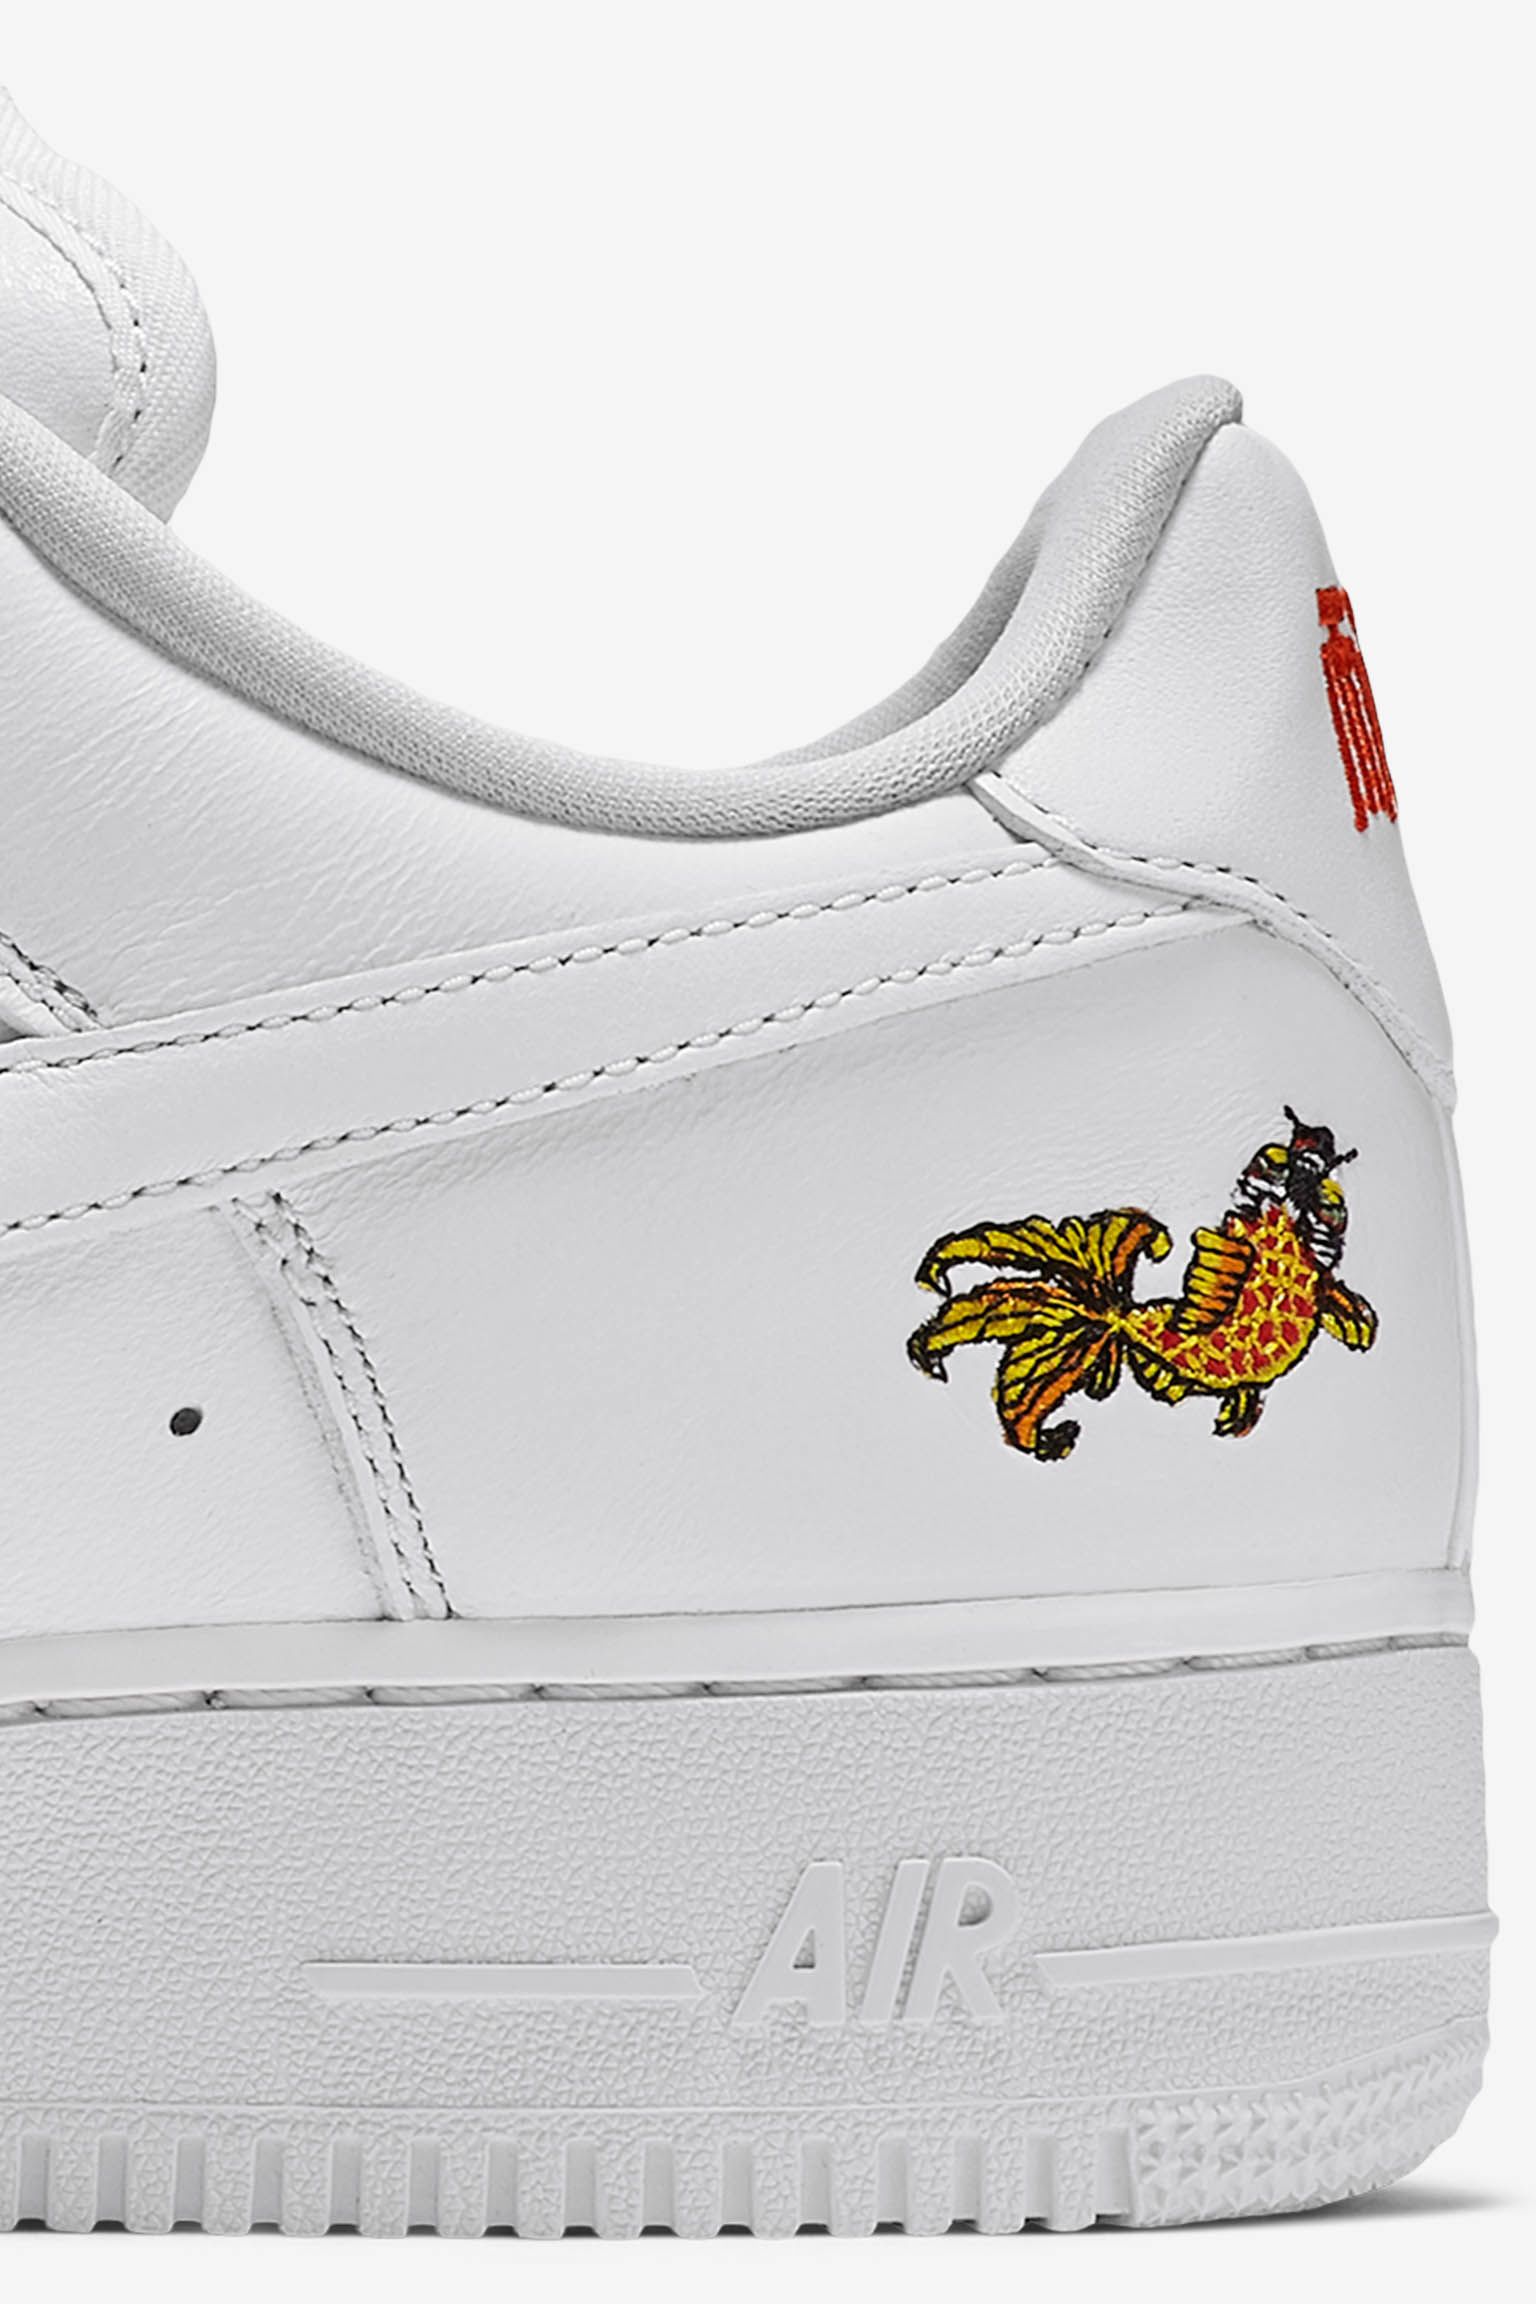 Nike Air Force 1 Low 'Chinese New Year'. Nike SNKRS